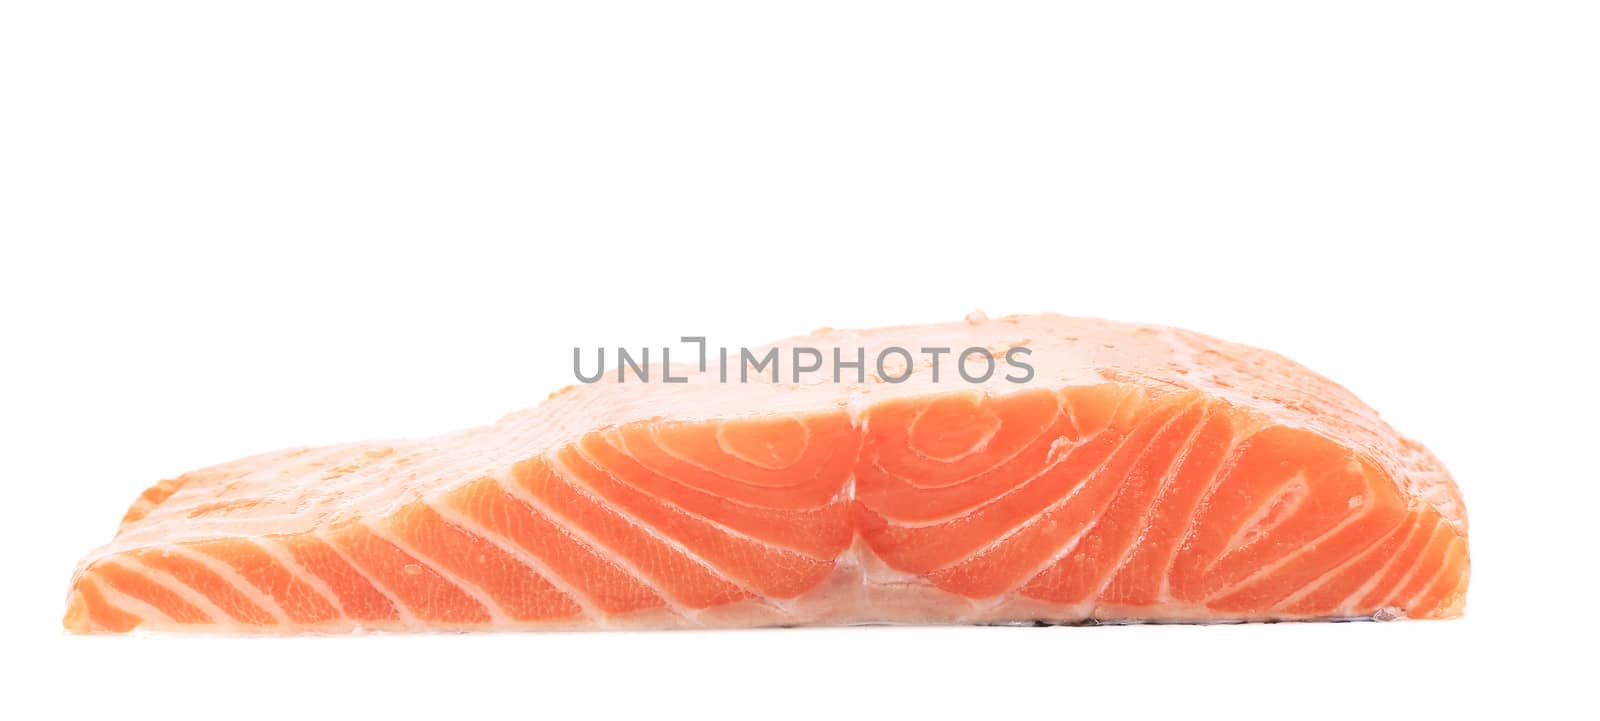 Salmon fillet close up. Isolated on a white background.